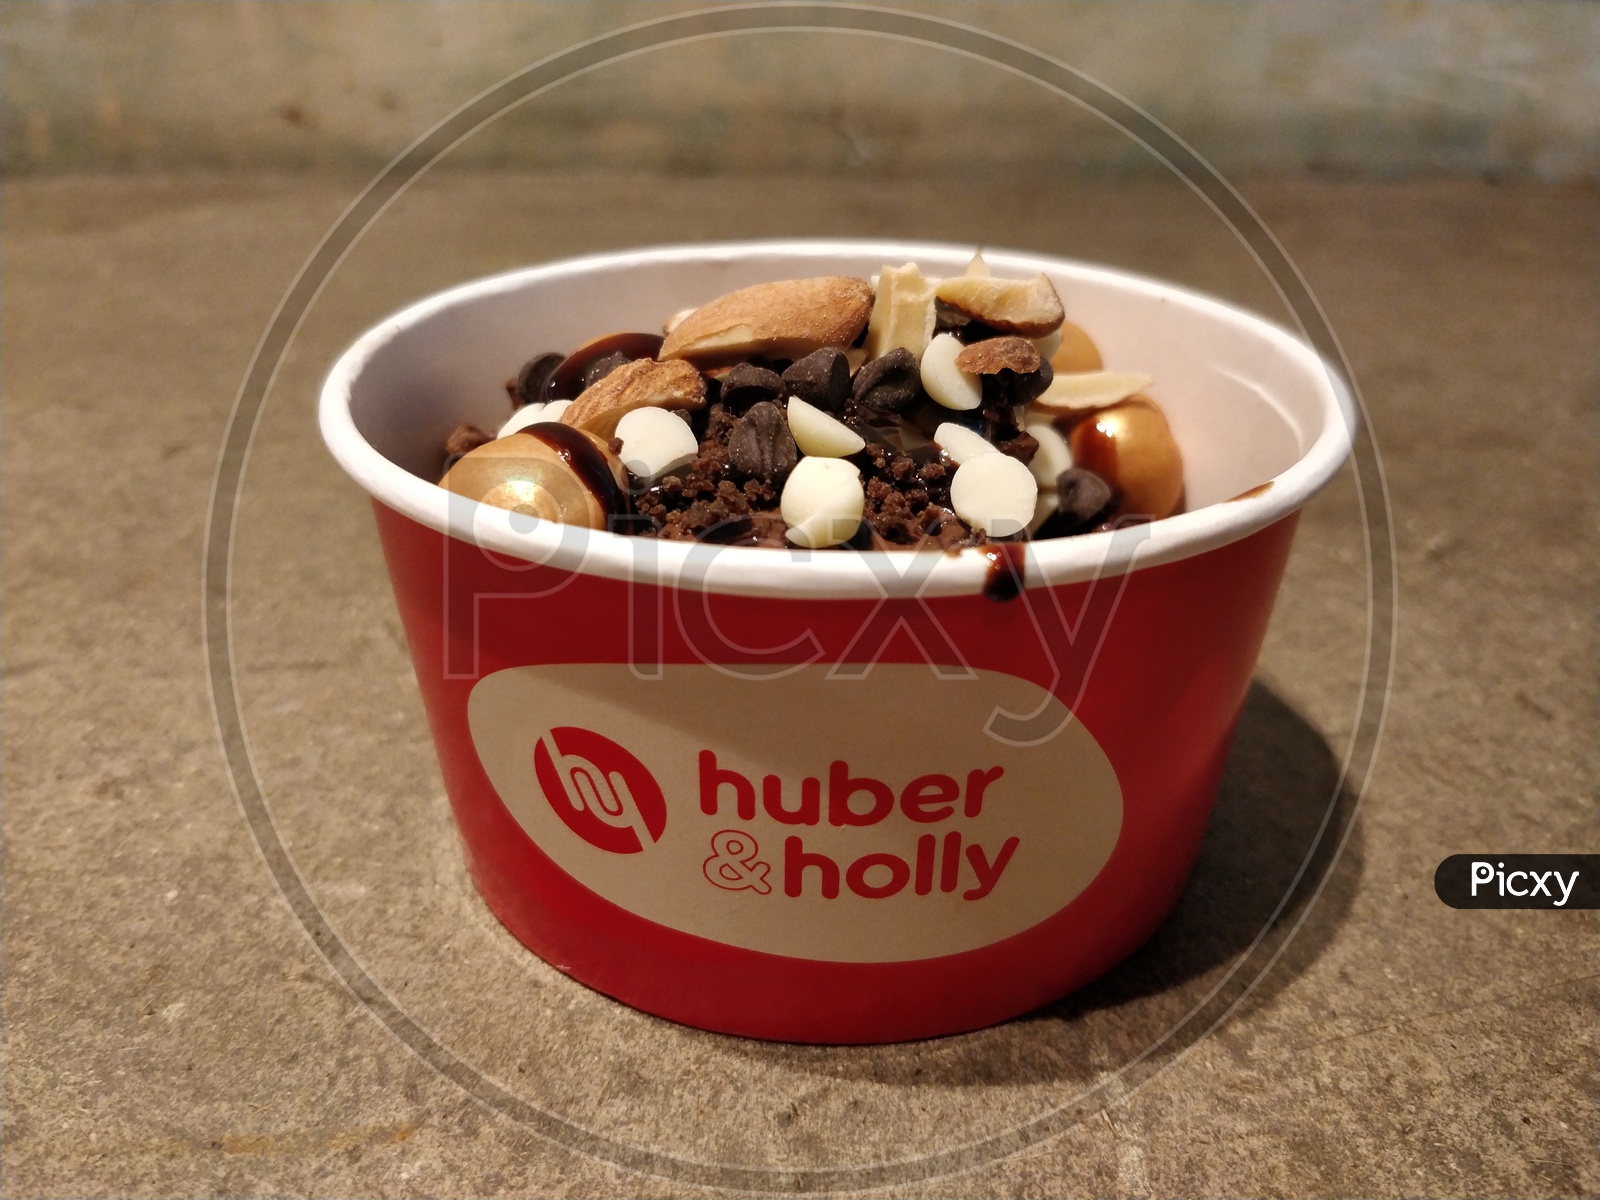 Huber and Holly logo on a ice creams cup